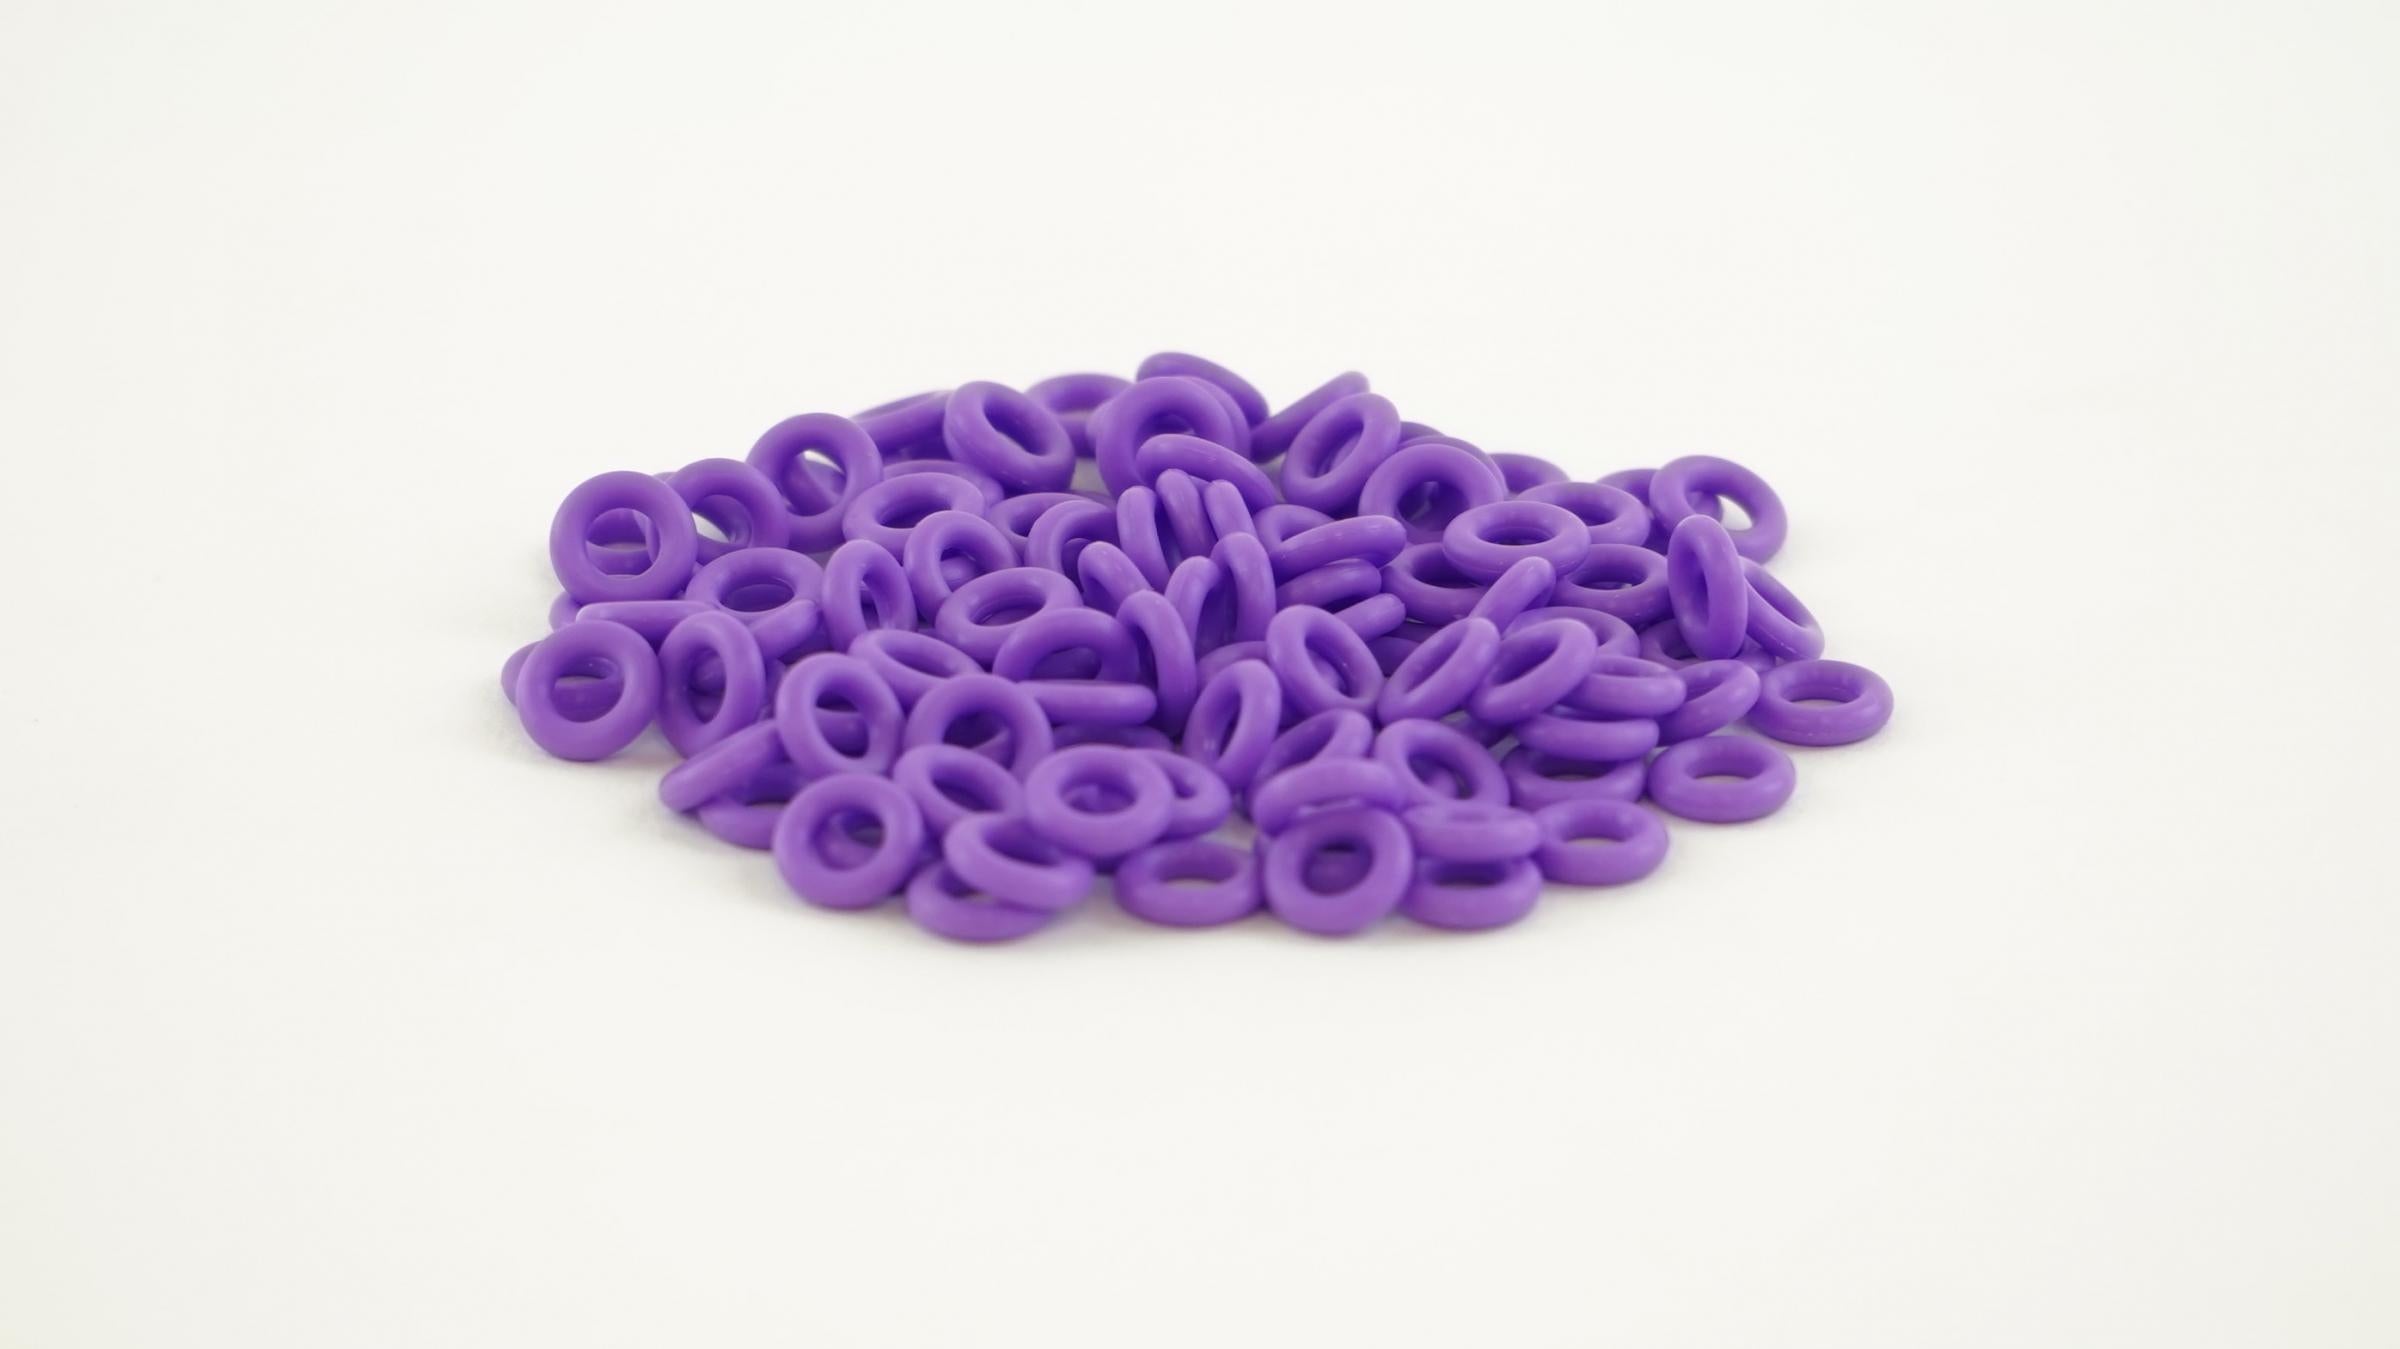 MK Pro Rings Silicone Switch Dampening O-rings 80A 2.5mm (120 Pack) MKGN4GJ03V |0|